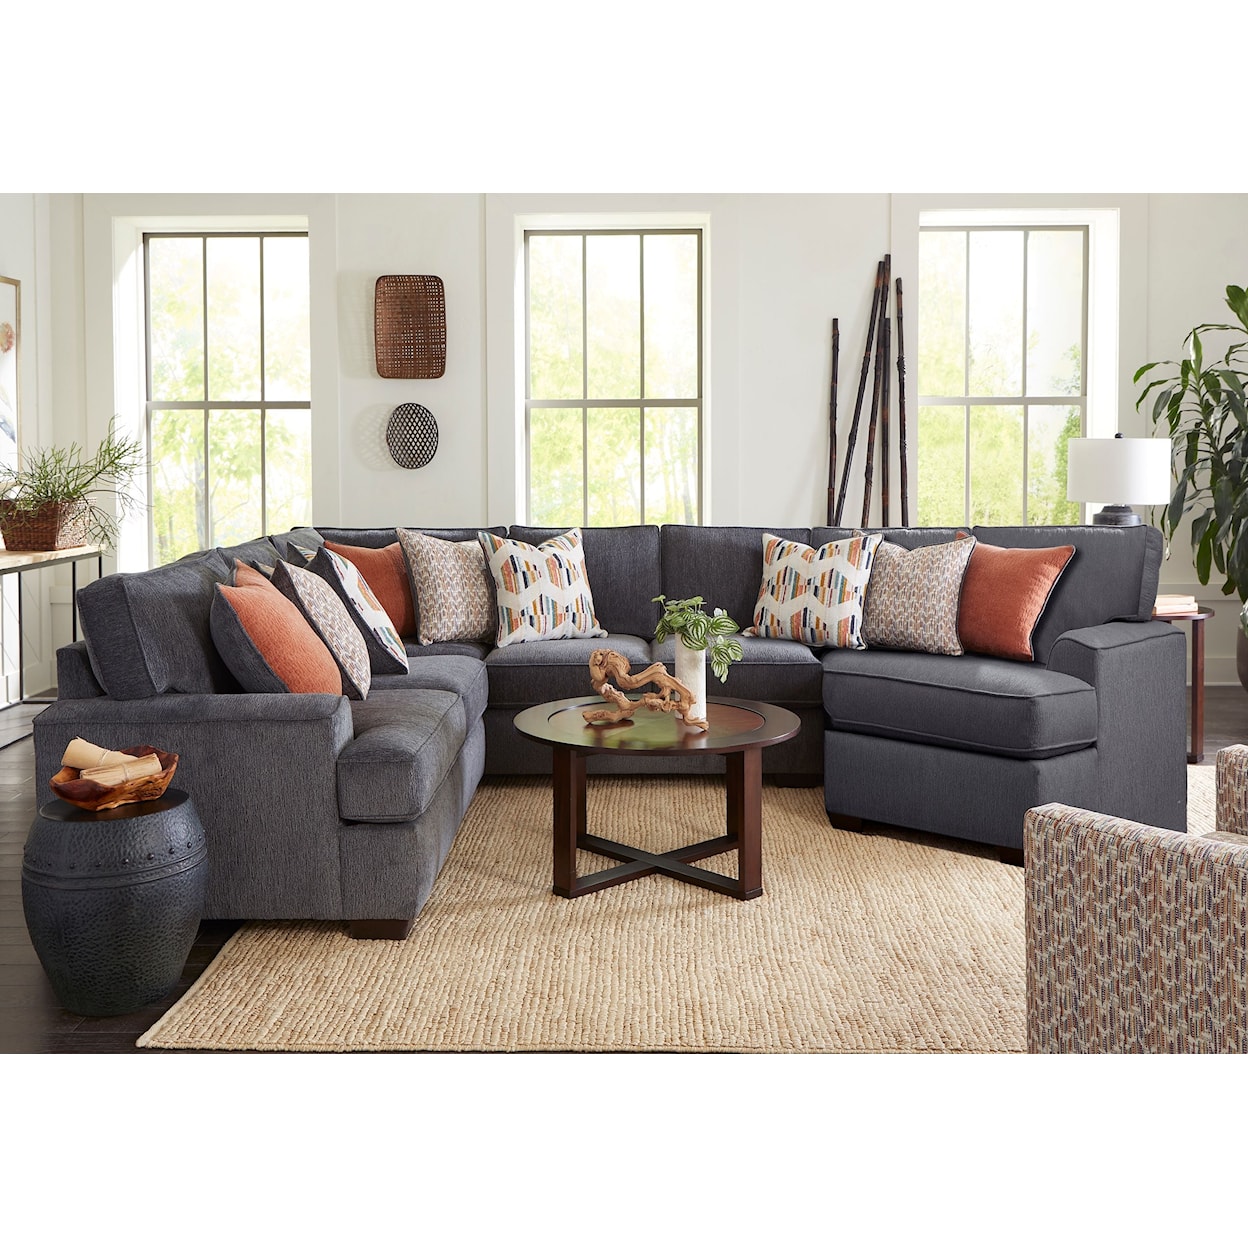 Behold Home BH3550 Rockport 3 PC Sectional